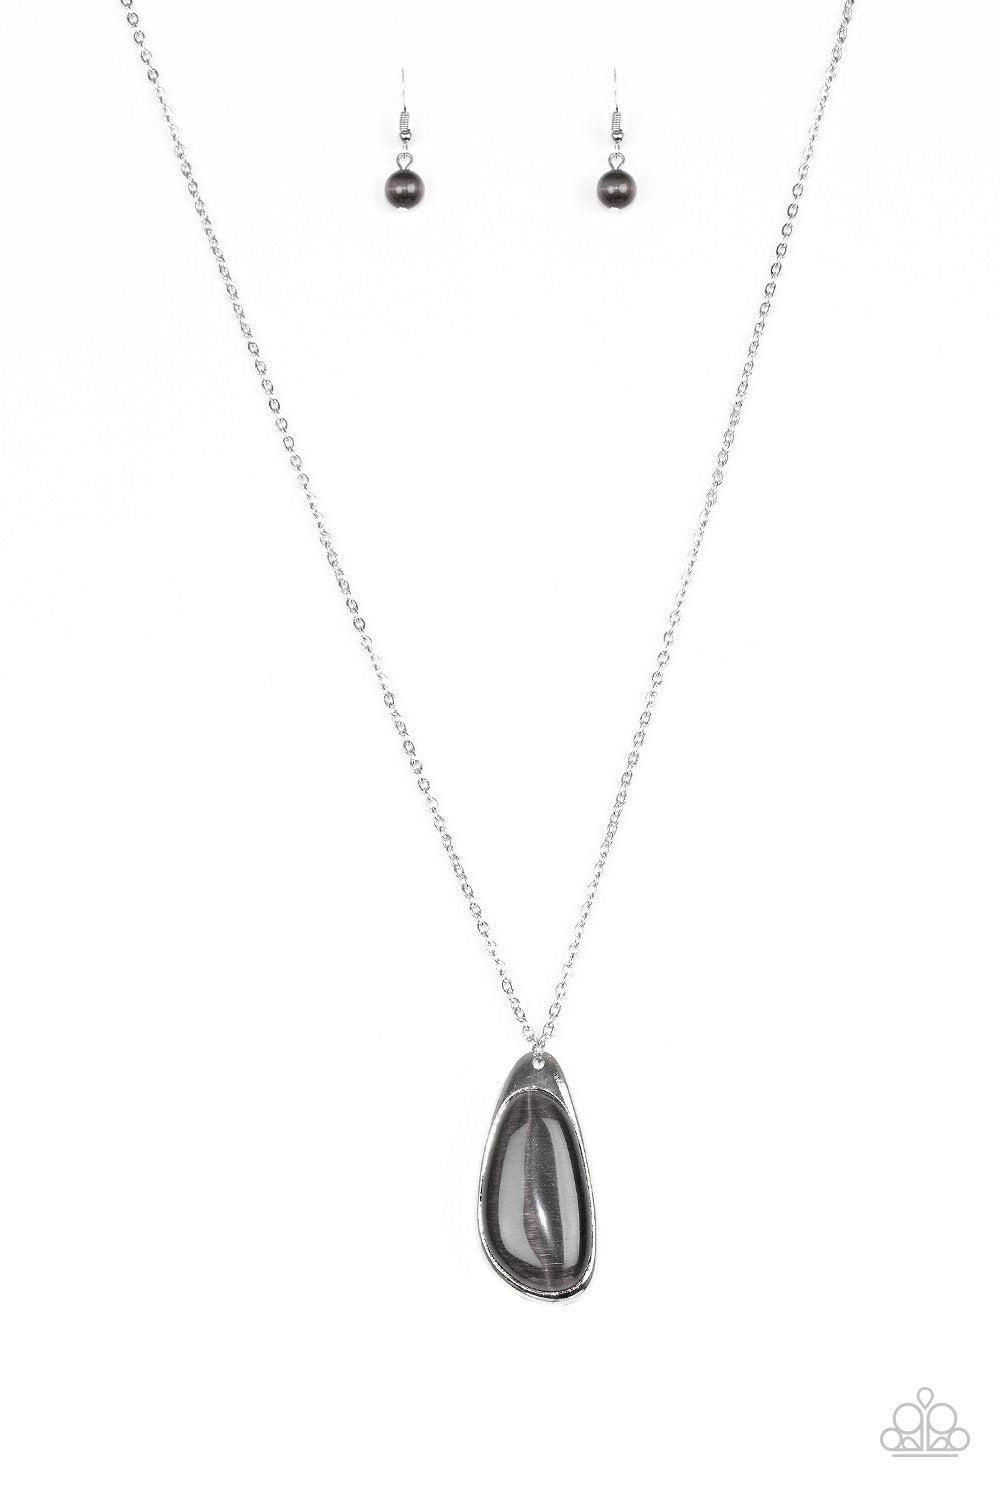 Magically Modern Silver Moonstone Necklace - Paparazzi Accessories-CarasShop.com - $5 Jewelry by Cara Jewels